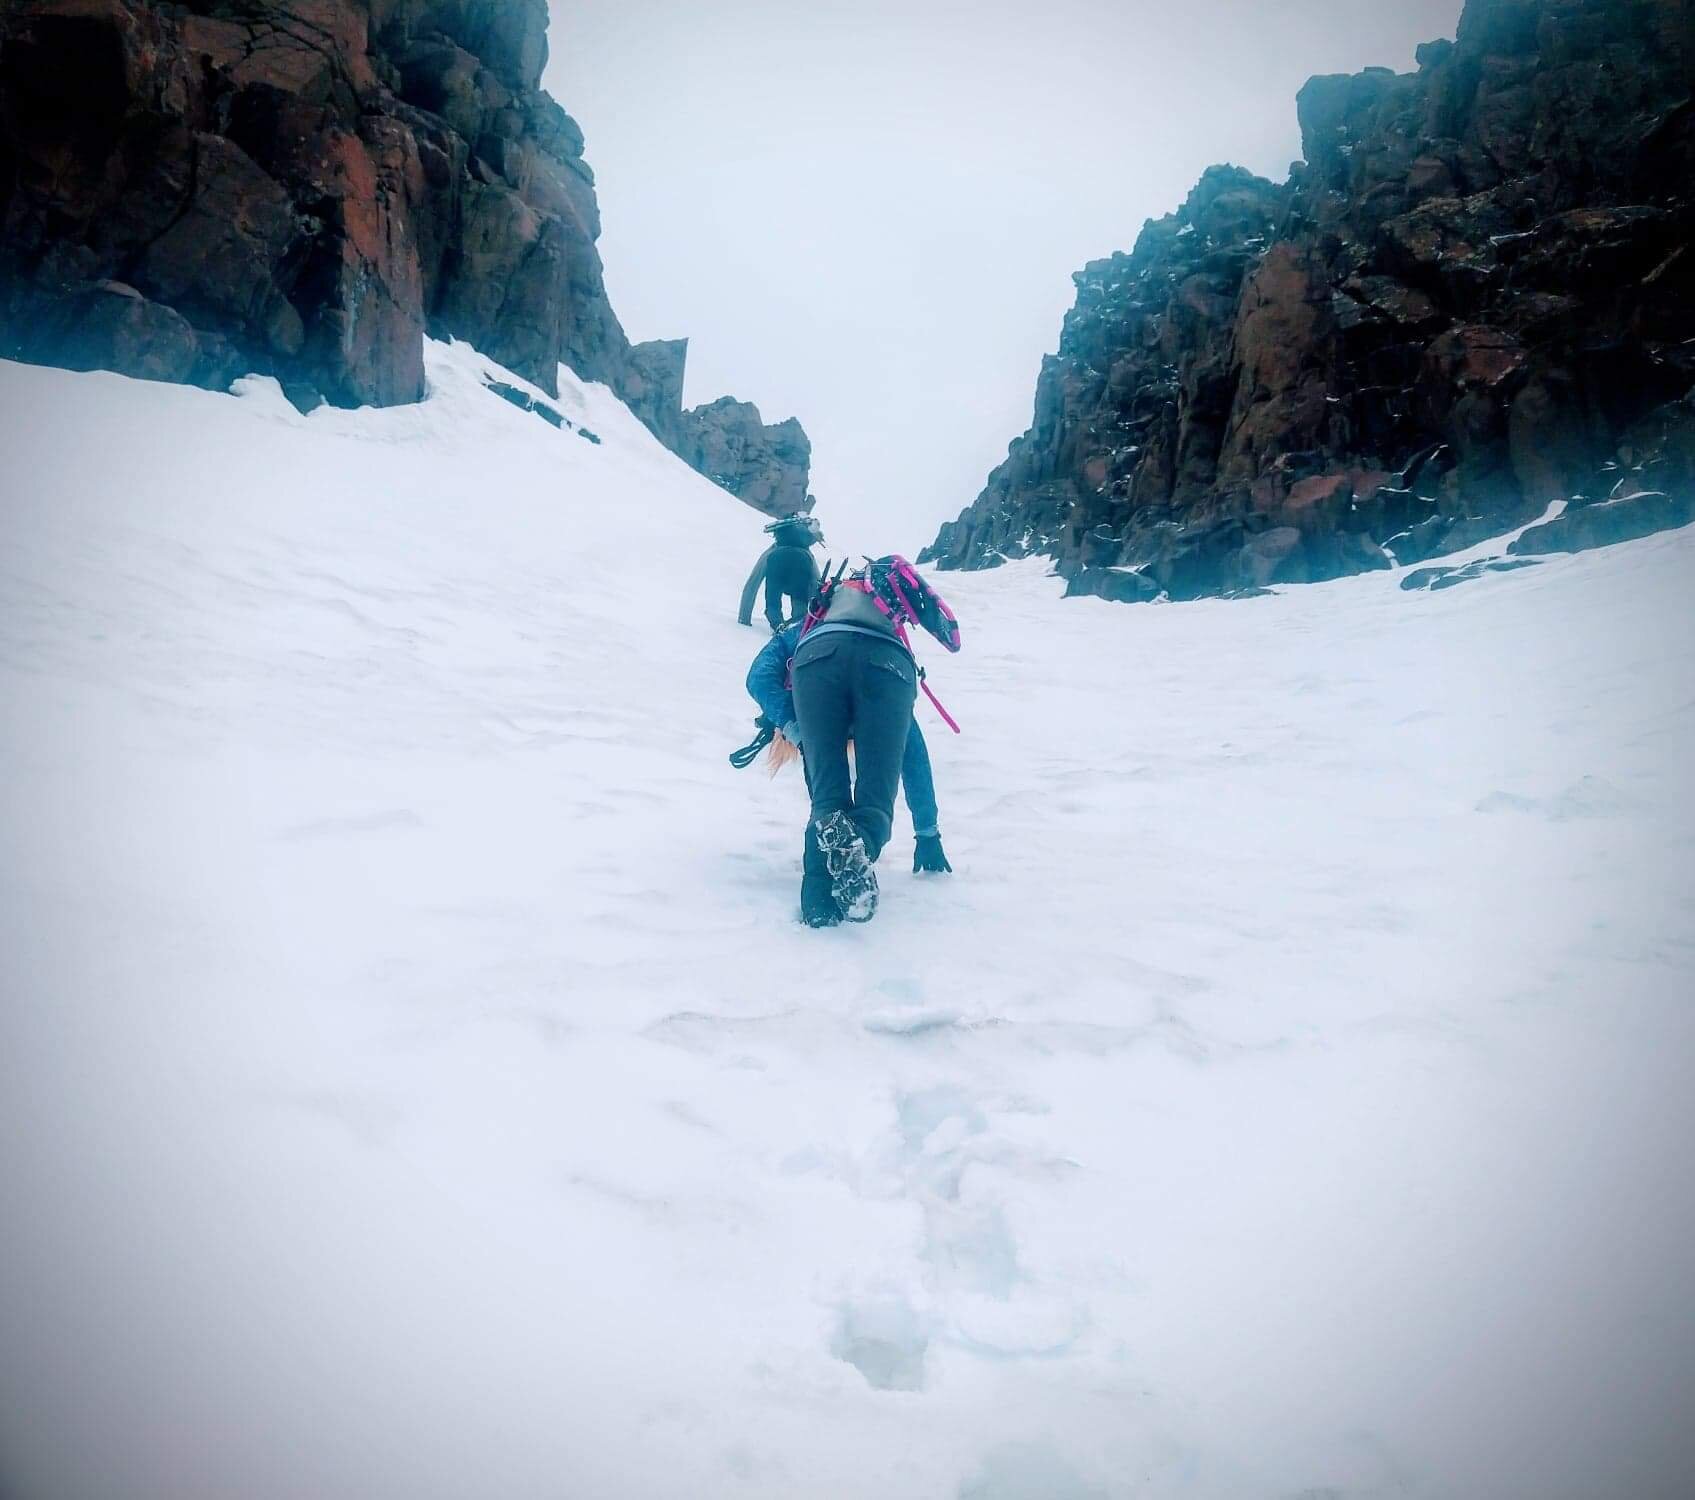 A quick snow storm while we climb scree